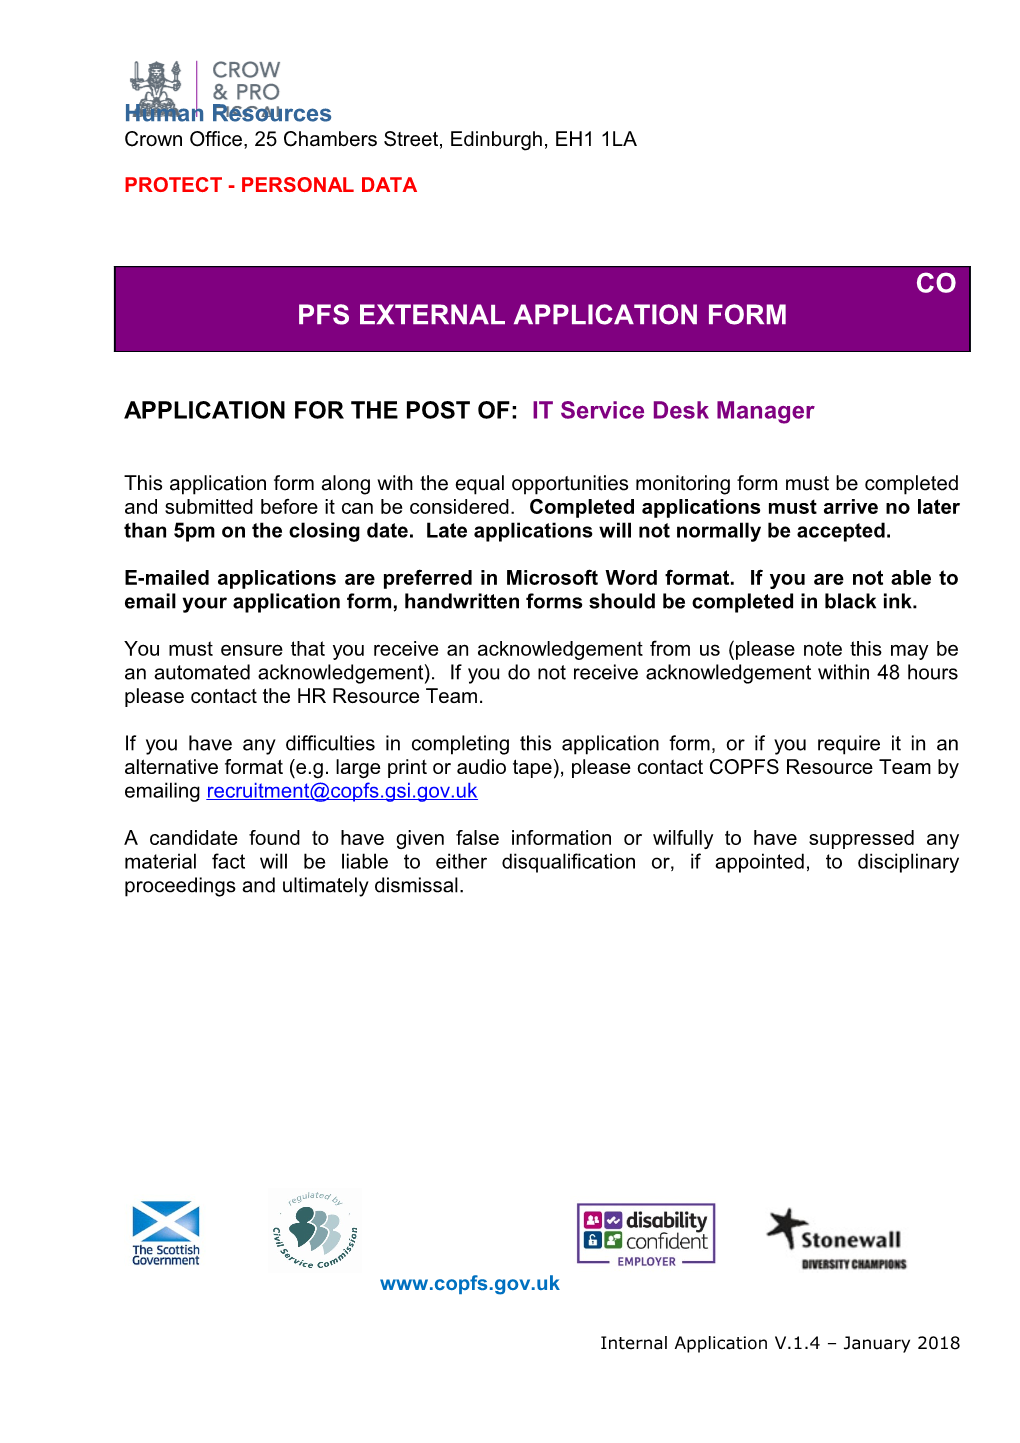 APPLICATION for the POST OF:IT Service Desk Manager